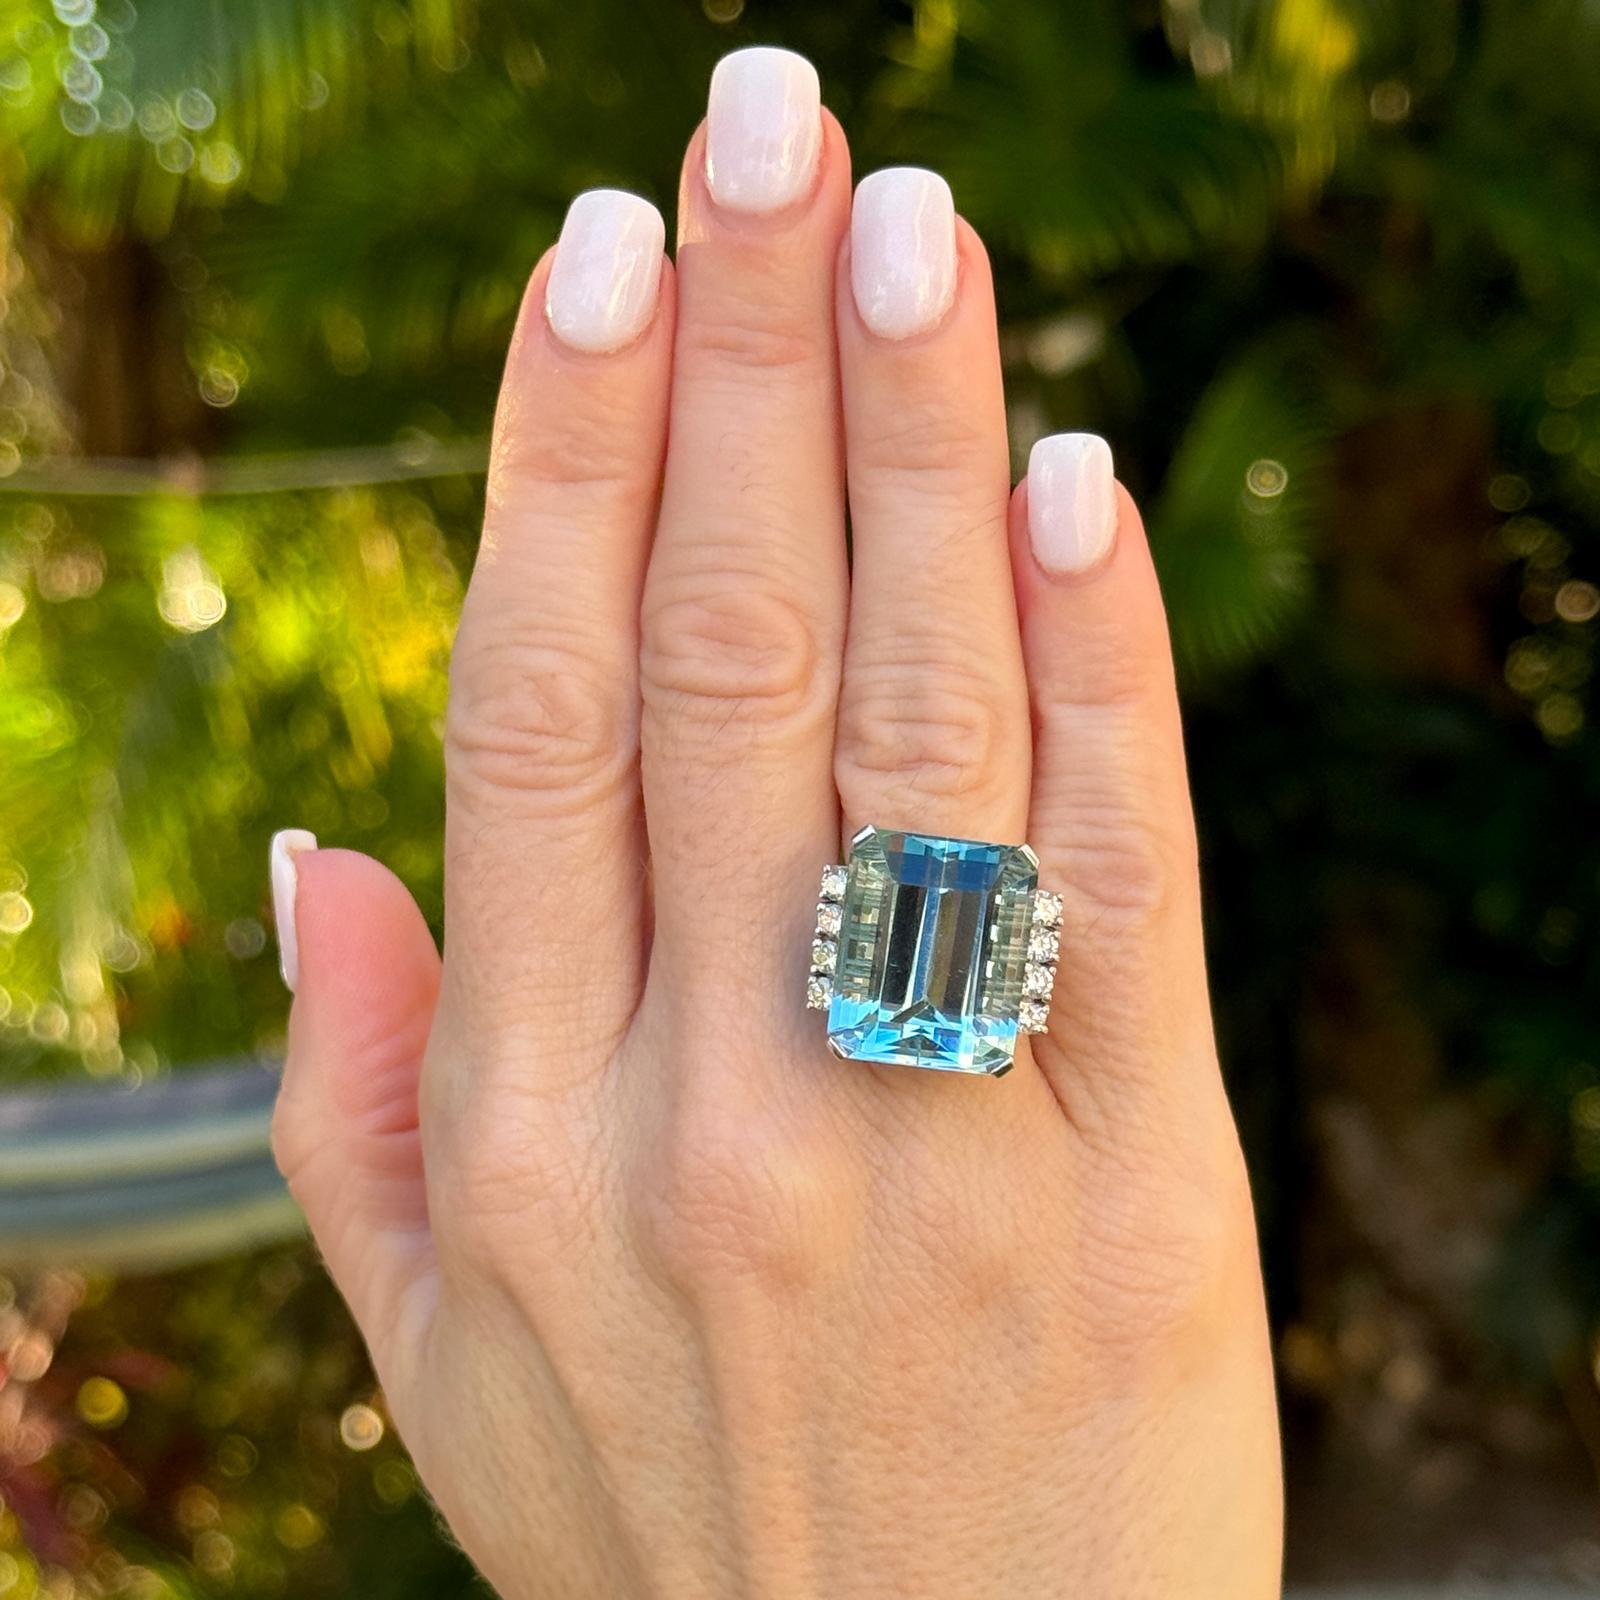 Stunning aquamarine diamond cocktail ring crafted in 18 karat white gold. The ring features an approximately 25 carat emerald cut aquamarine gemstone flanked by 8 round brilliant cut diamonds weighing approximately .88 CTW. The diamonds are graded